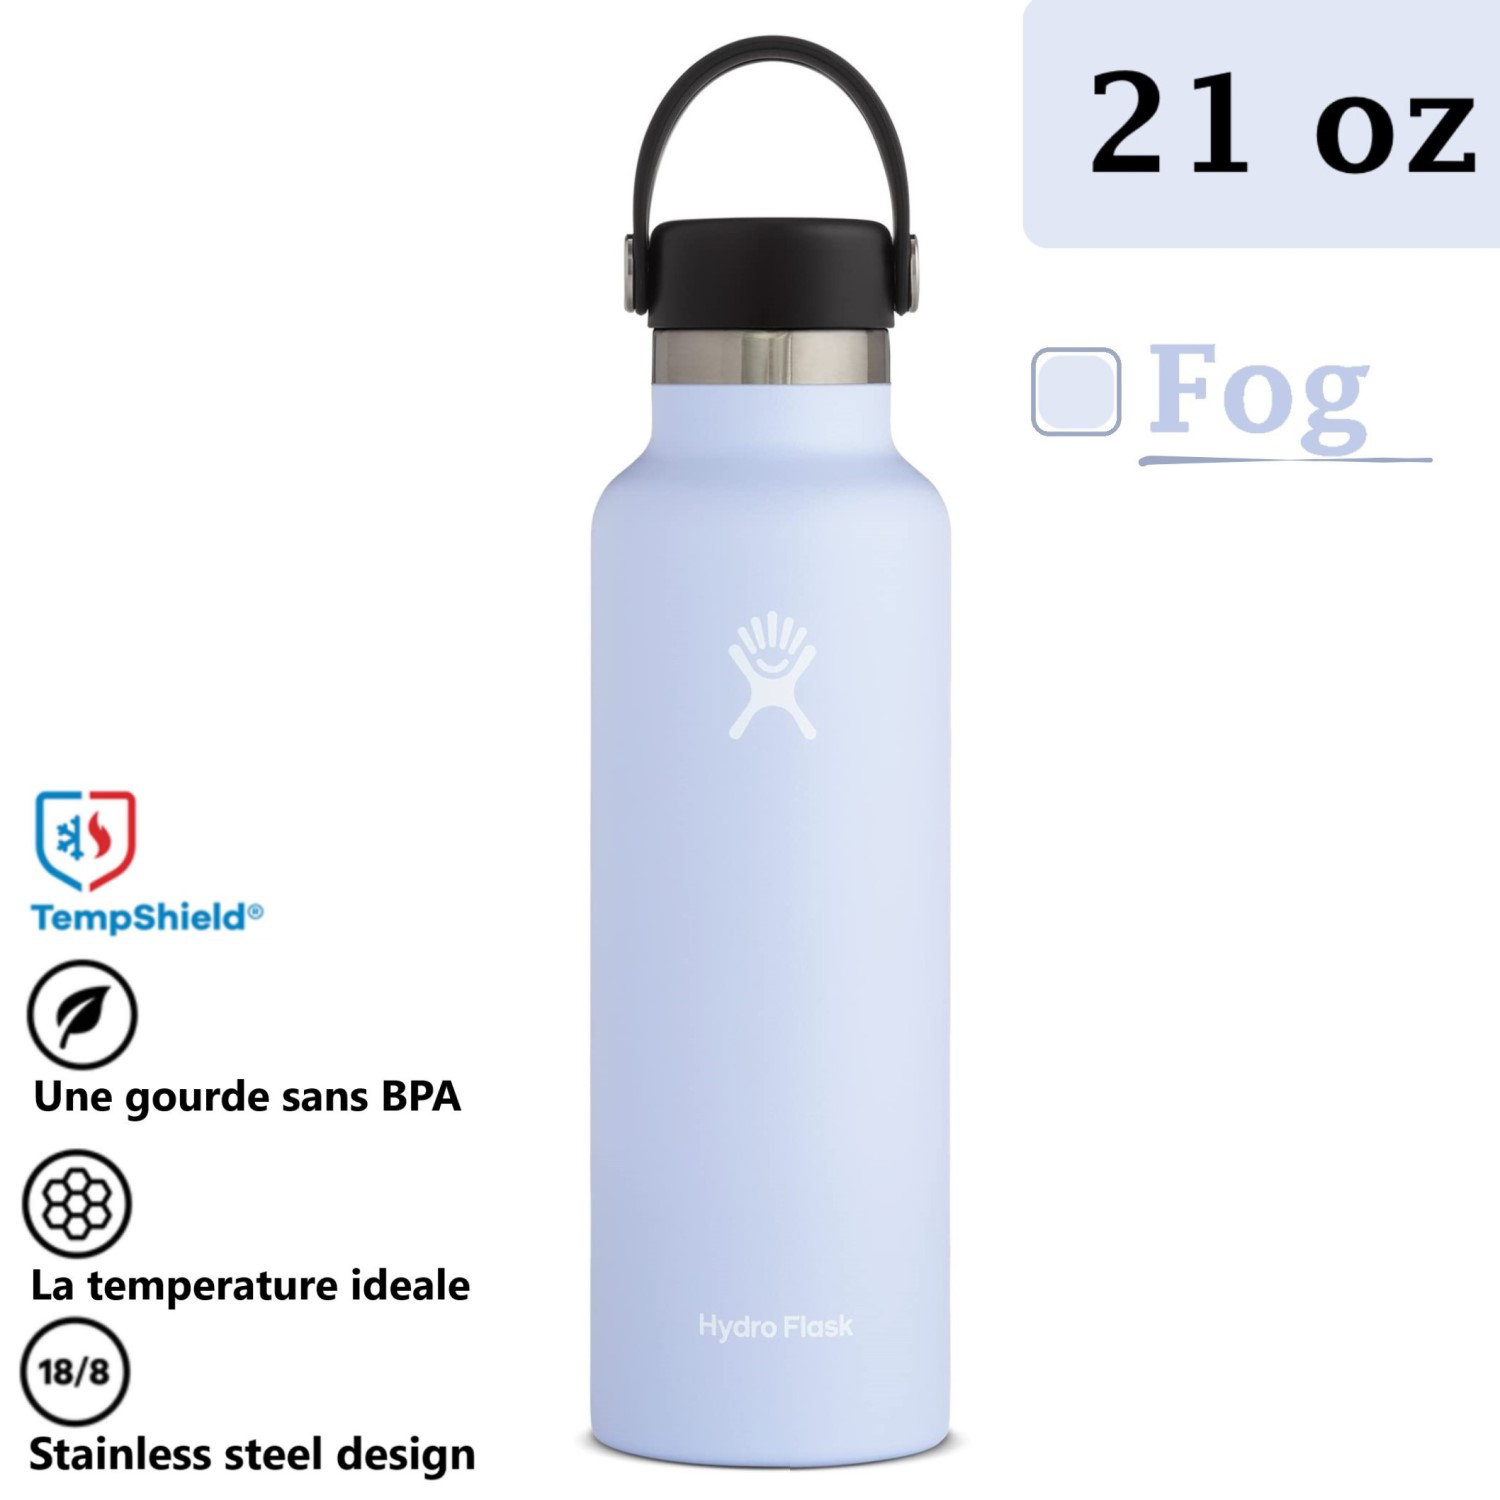 Hydro Flask 21oz. Standard Mouth Insulated Stainless Steel Water Bottle  Reviews 2023